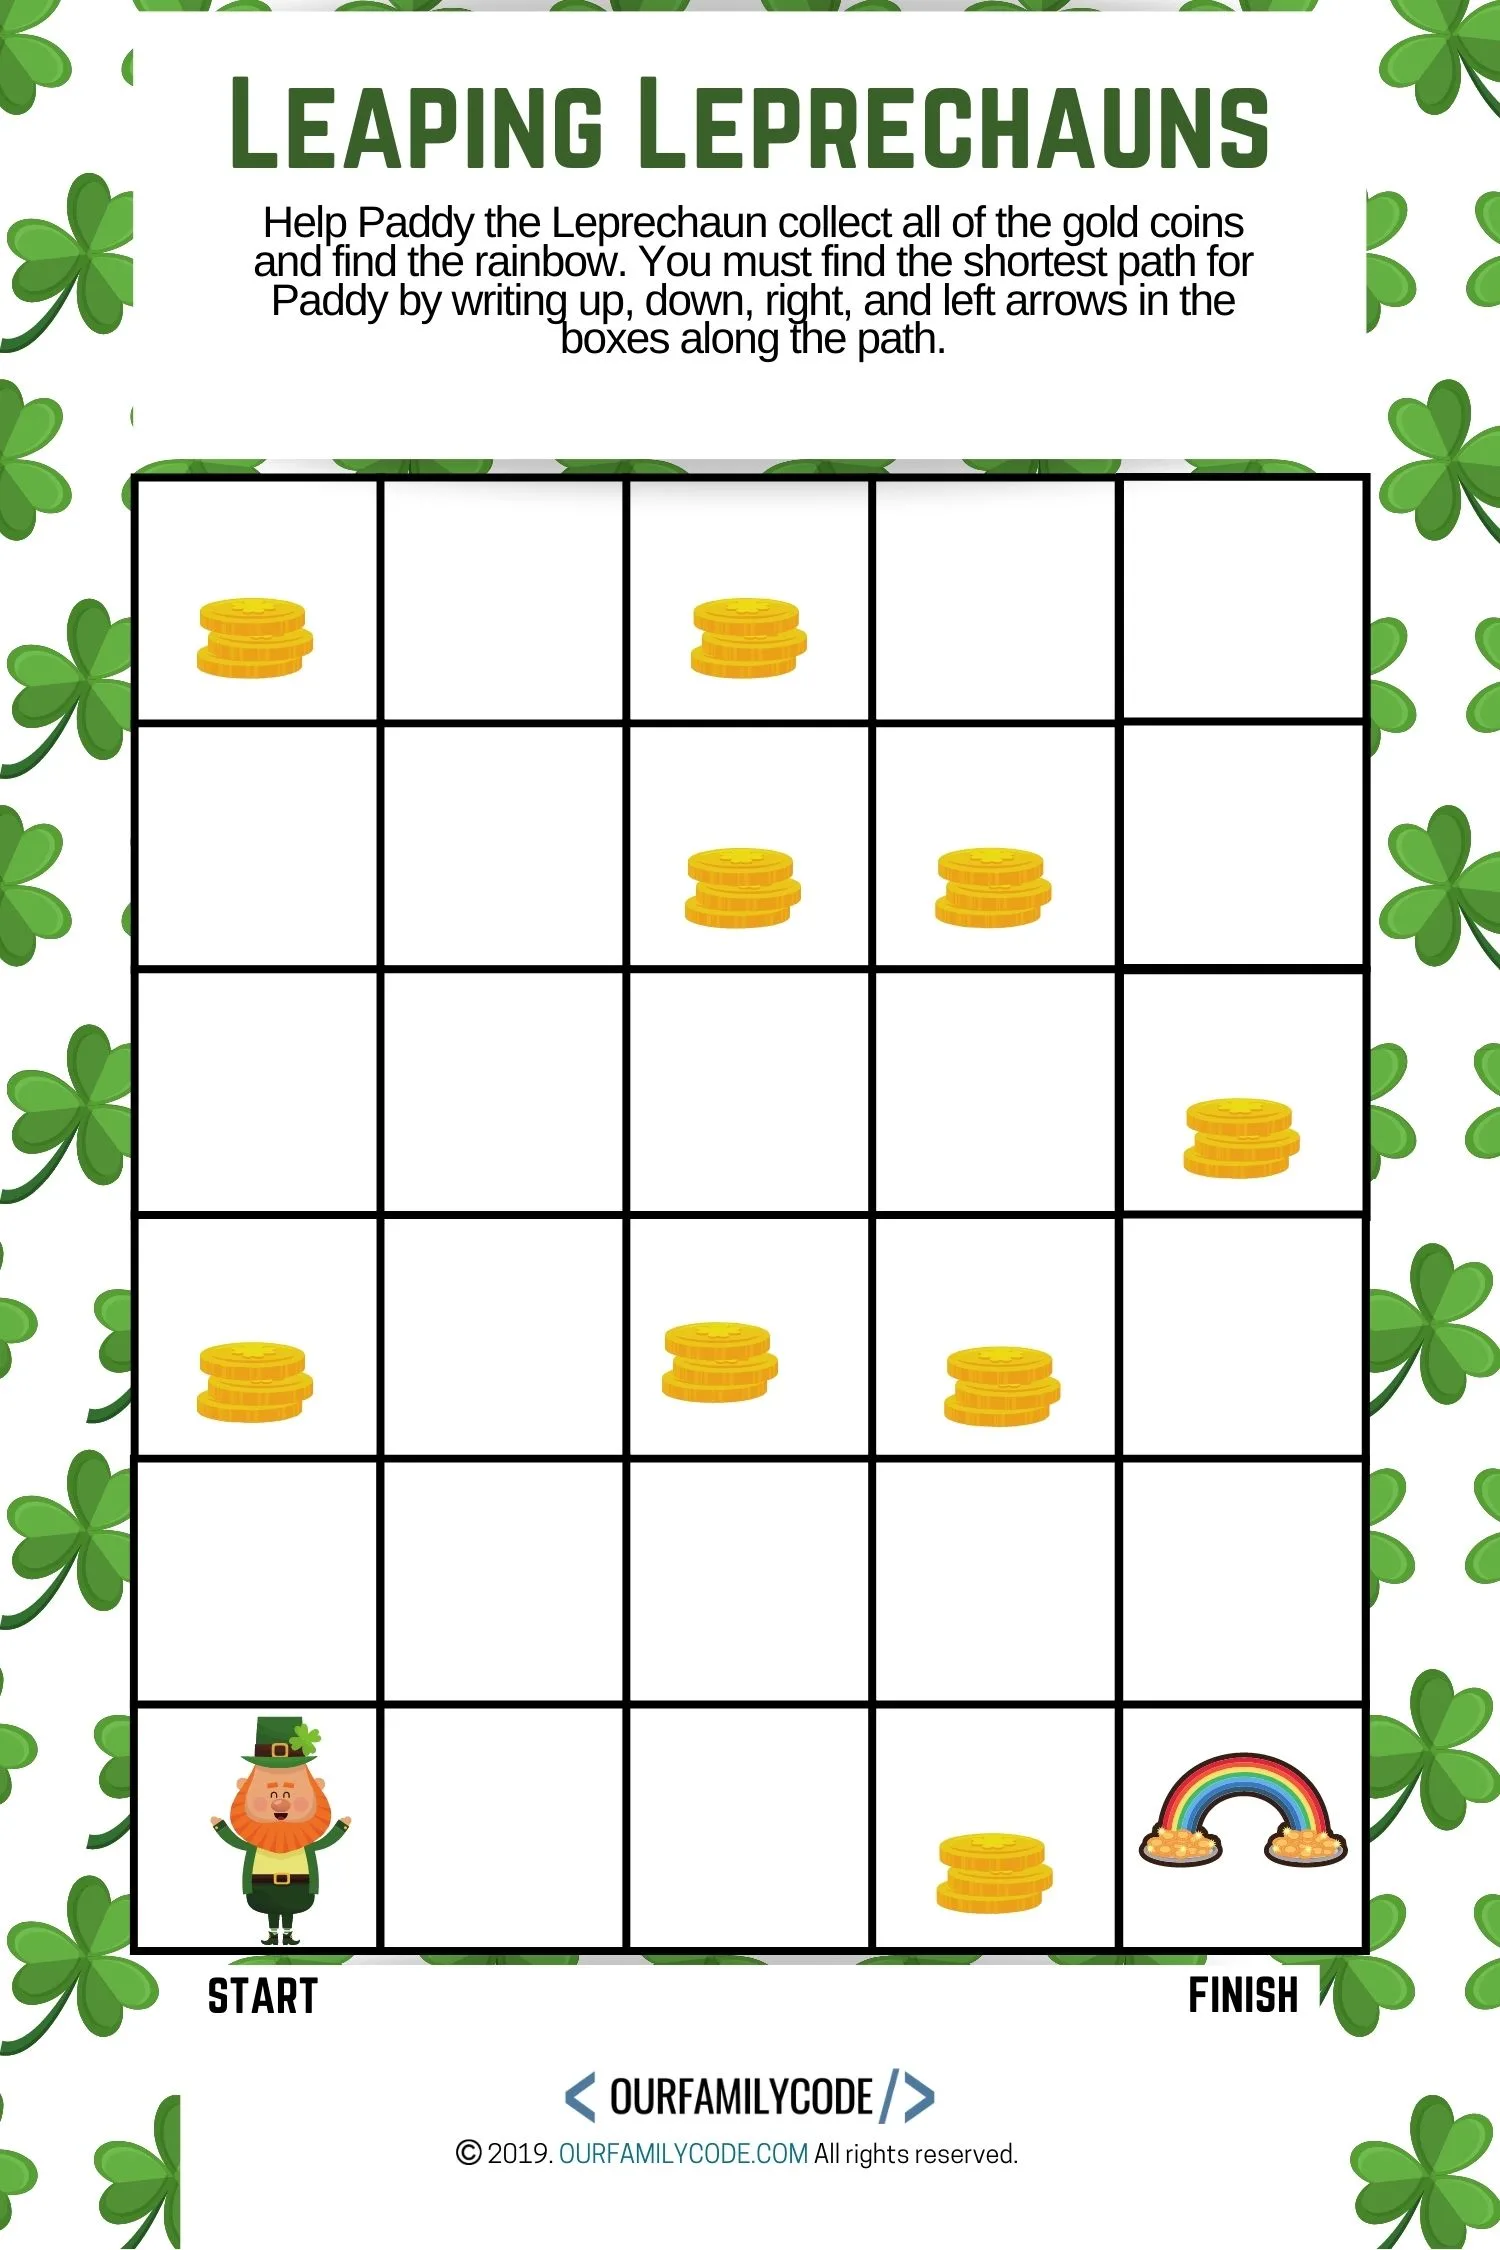 Help Paddy the Leprechaun collect all of his gold coins and get to the rainbow by coding the shortest sequence in this leprechaun sequence coding activity!! #teachkidstocode #freeworksheets #codingactivitiesforkids #STEM #STEAM #unpluggedcoding 